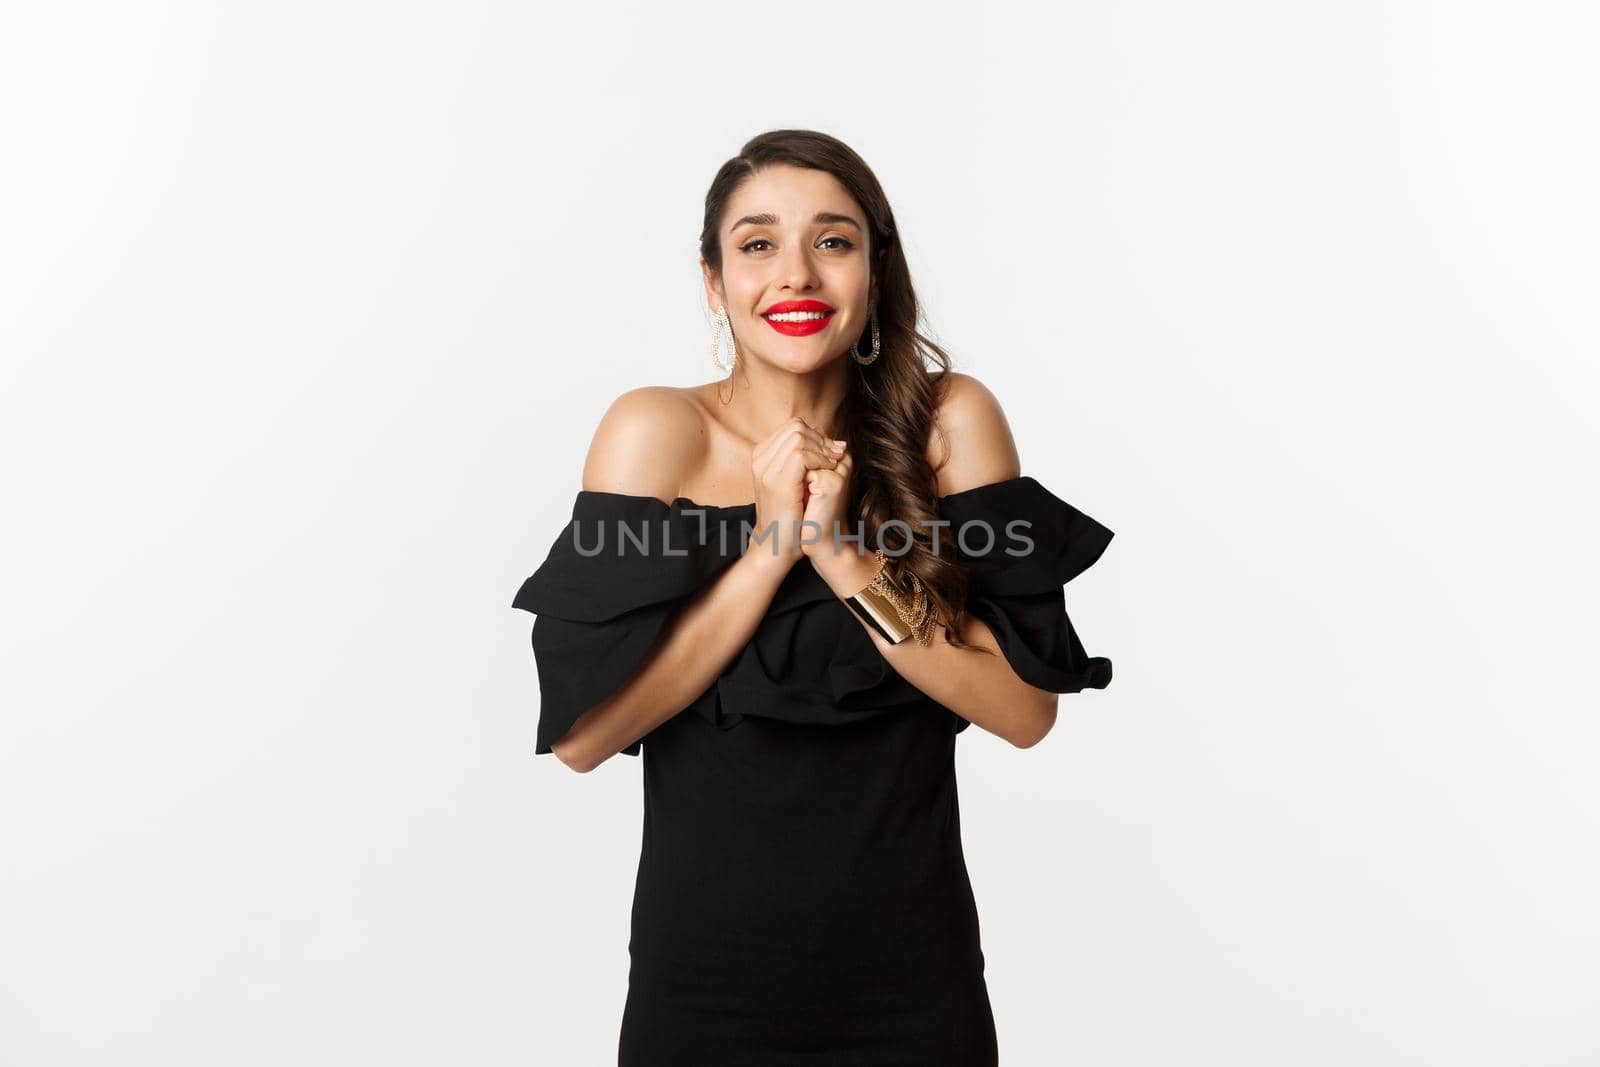 Fashion and beauty. Pretty woman in black dress asking for help, showing thank you gesture, looking grateful at camera, standing over white background.